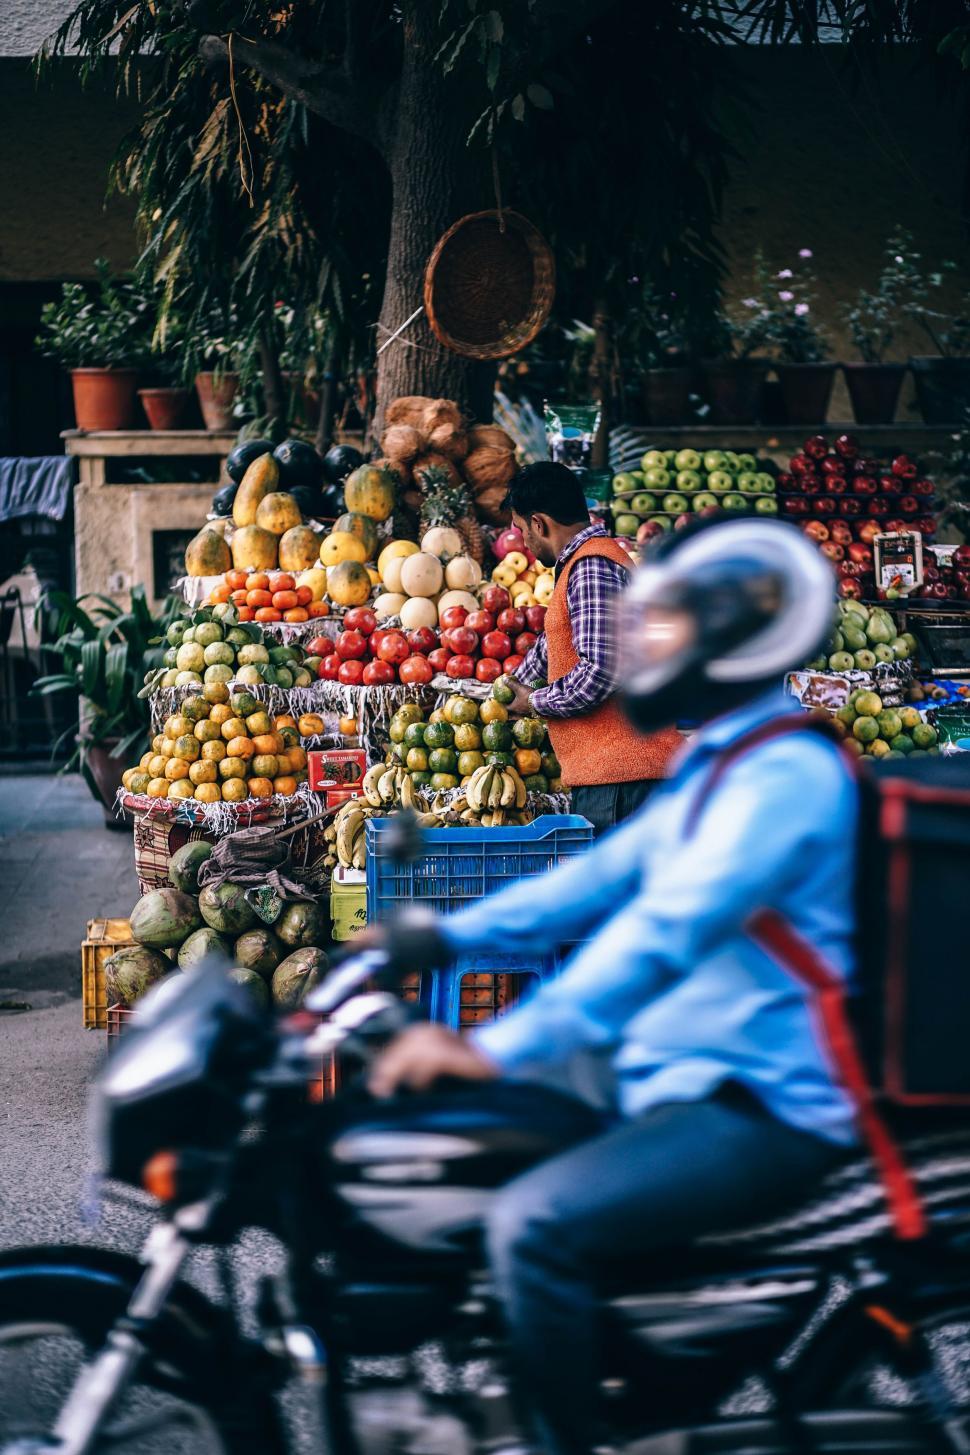 Free Image of Man Riding Motorcycle Past Fruit Stand 